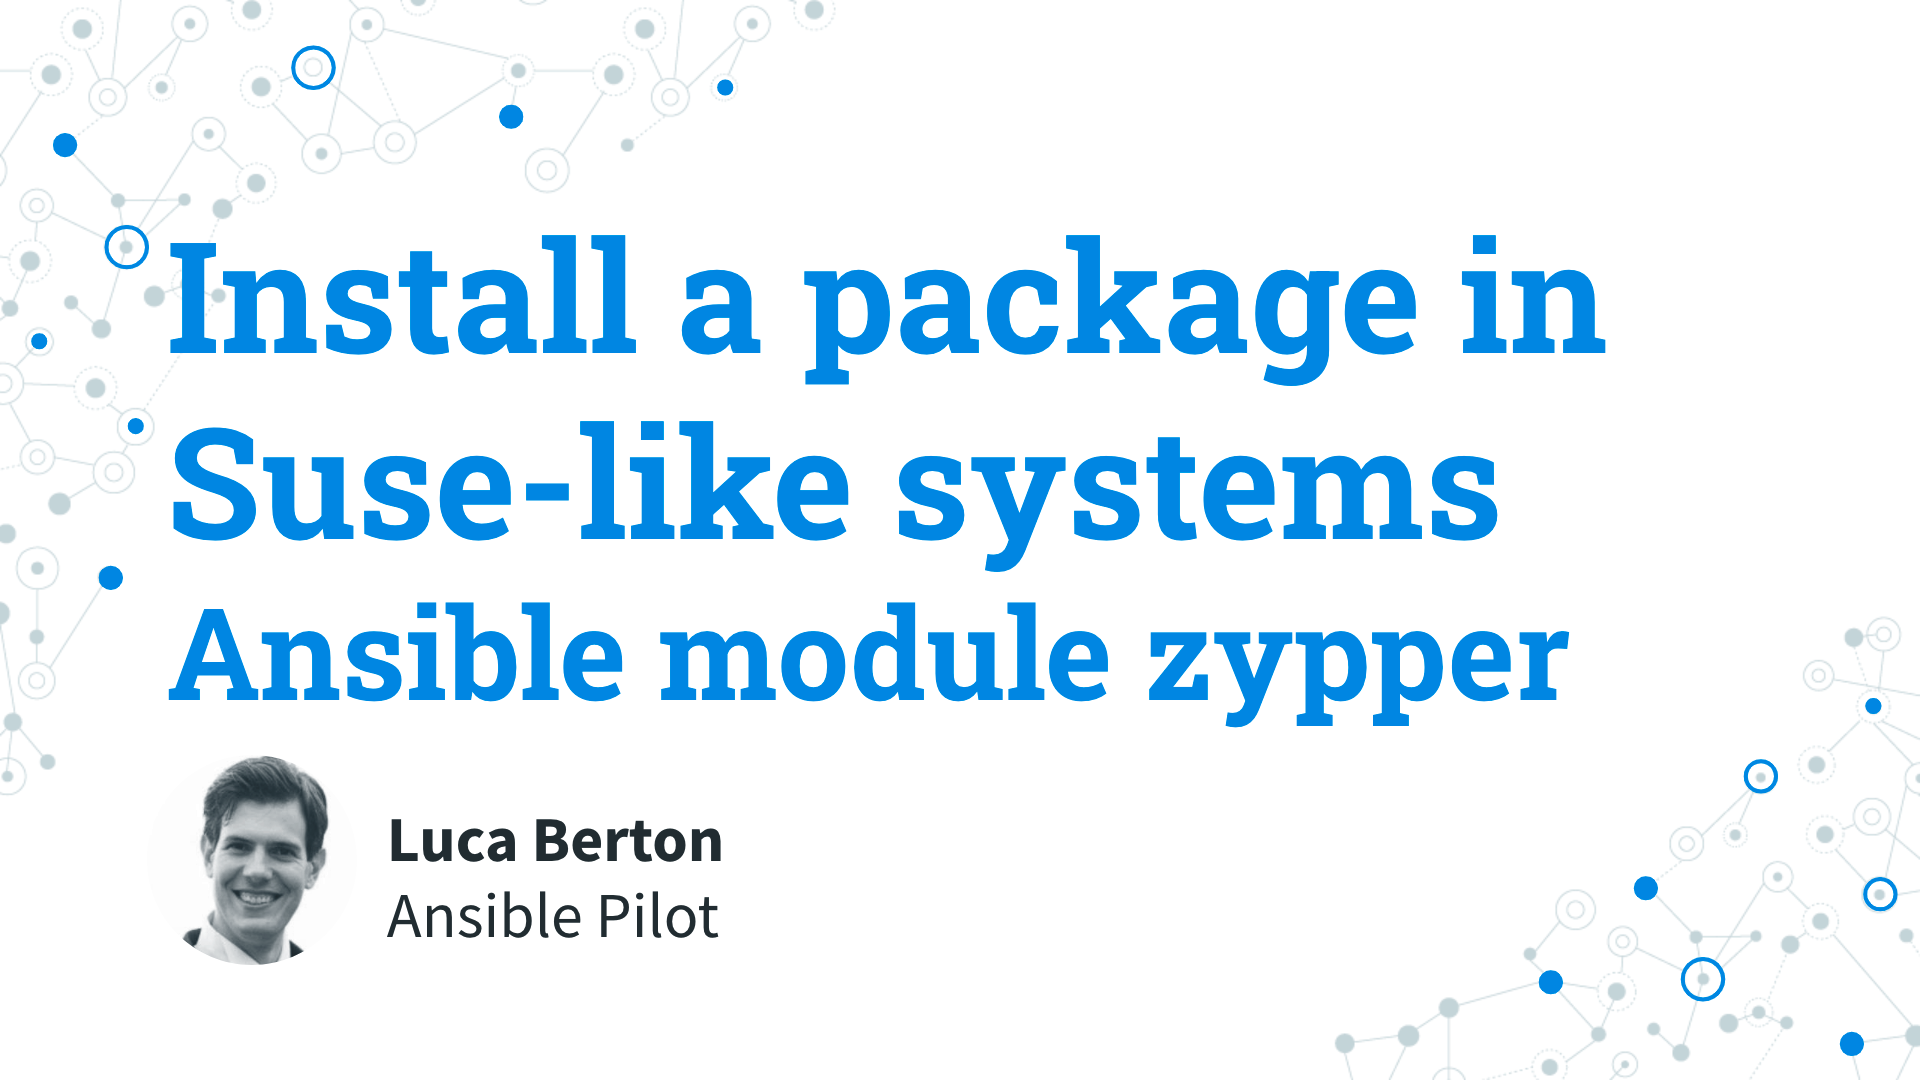 Install a package in Suse-like systems - Ansible module zypper